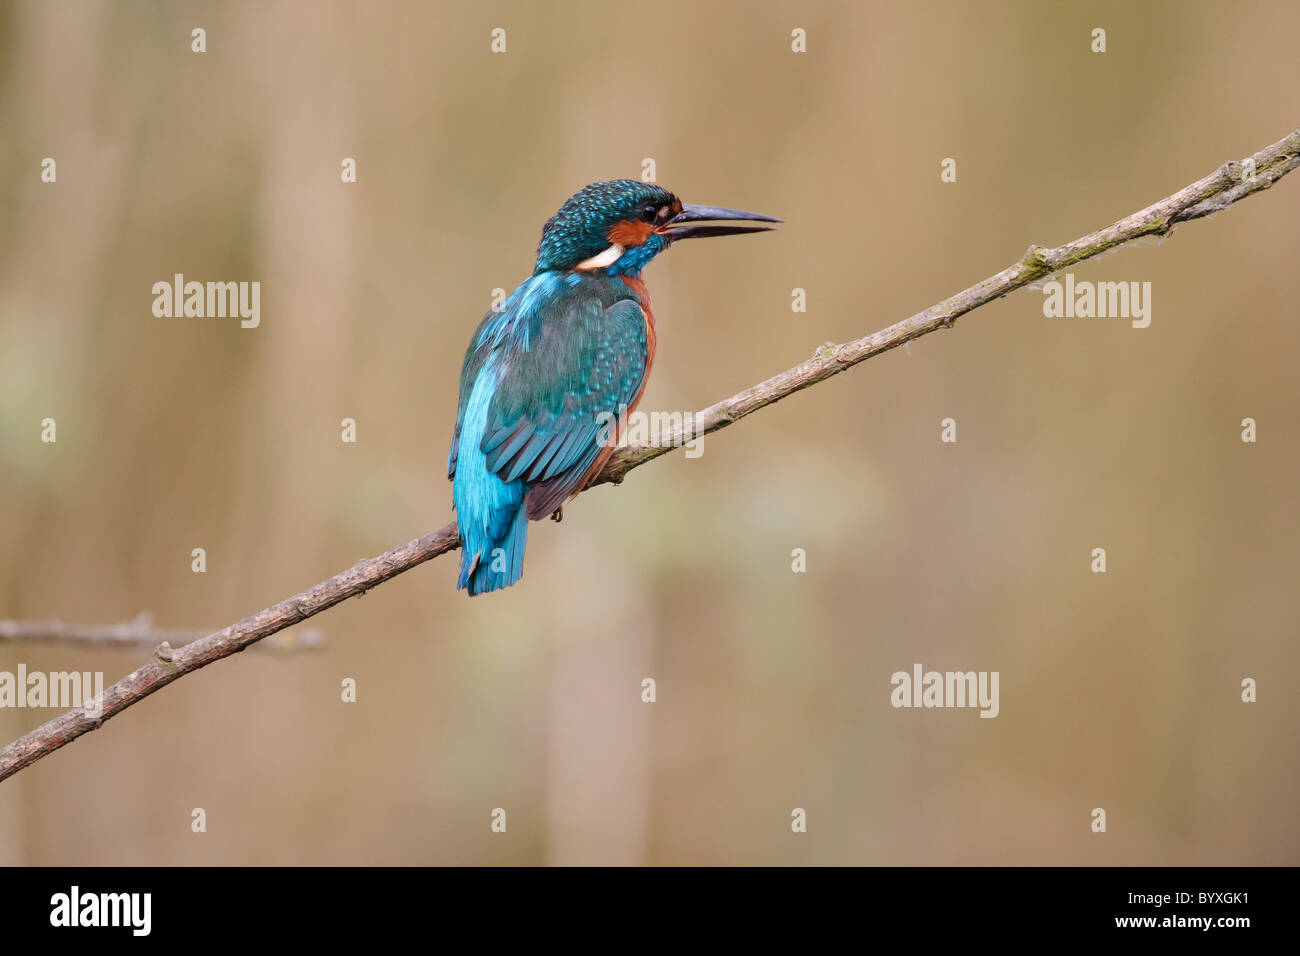 Kingfisher on a perch Stock Photo